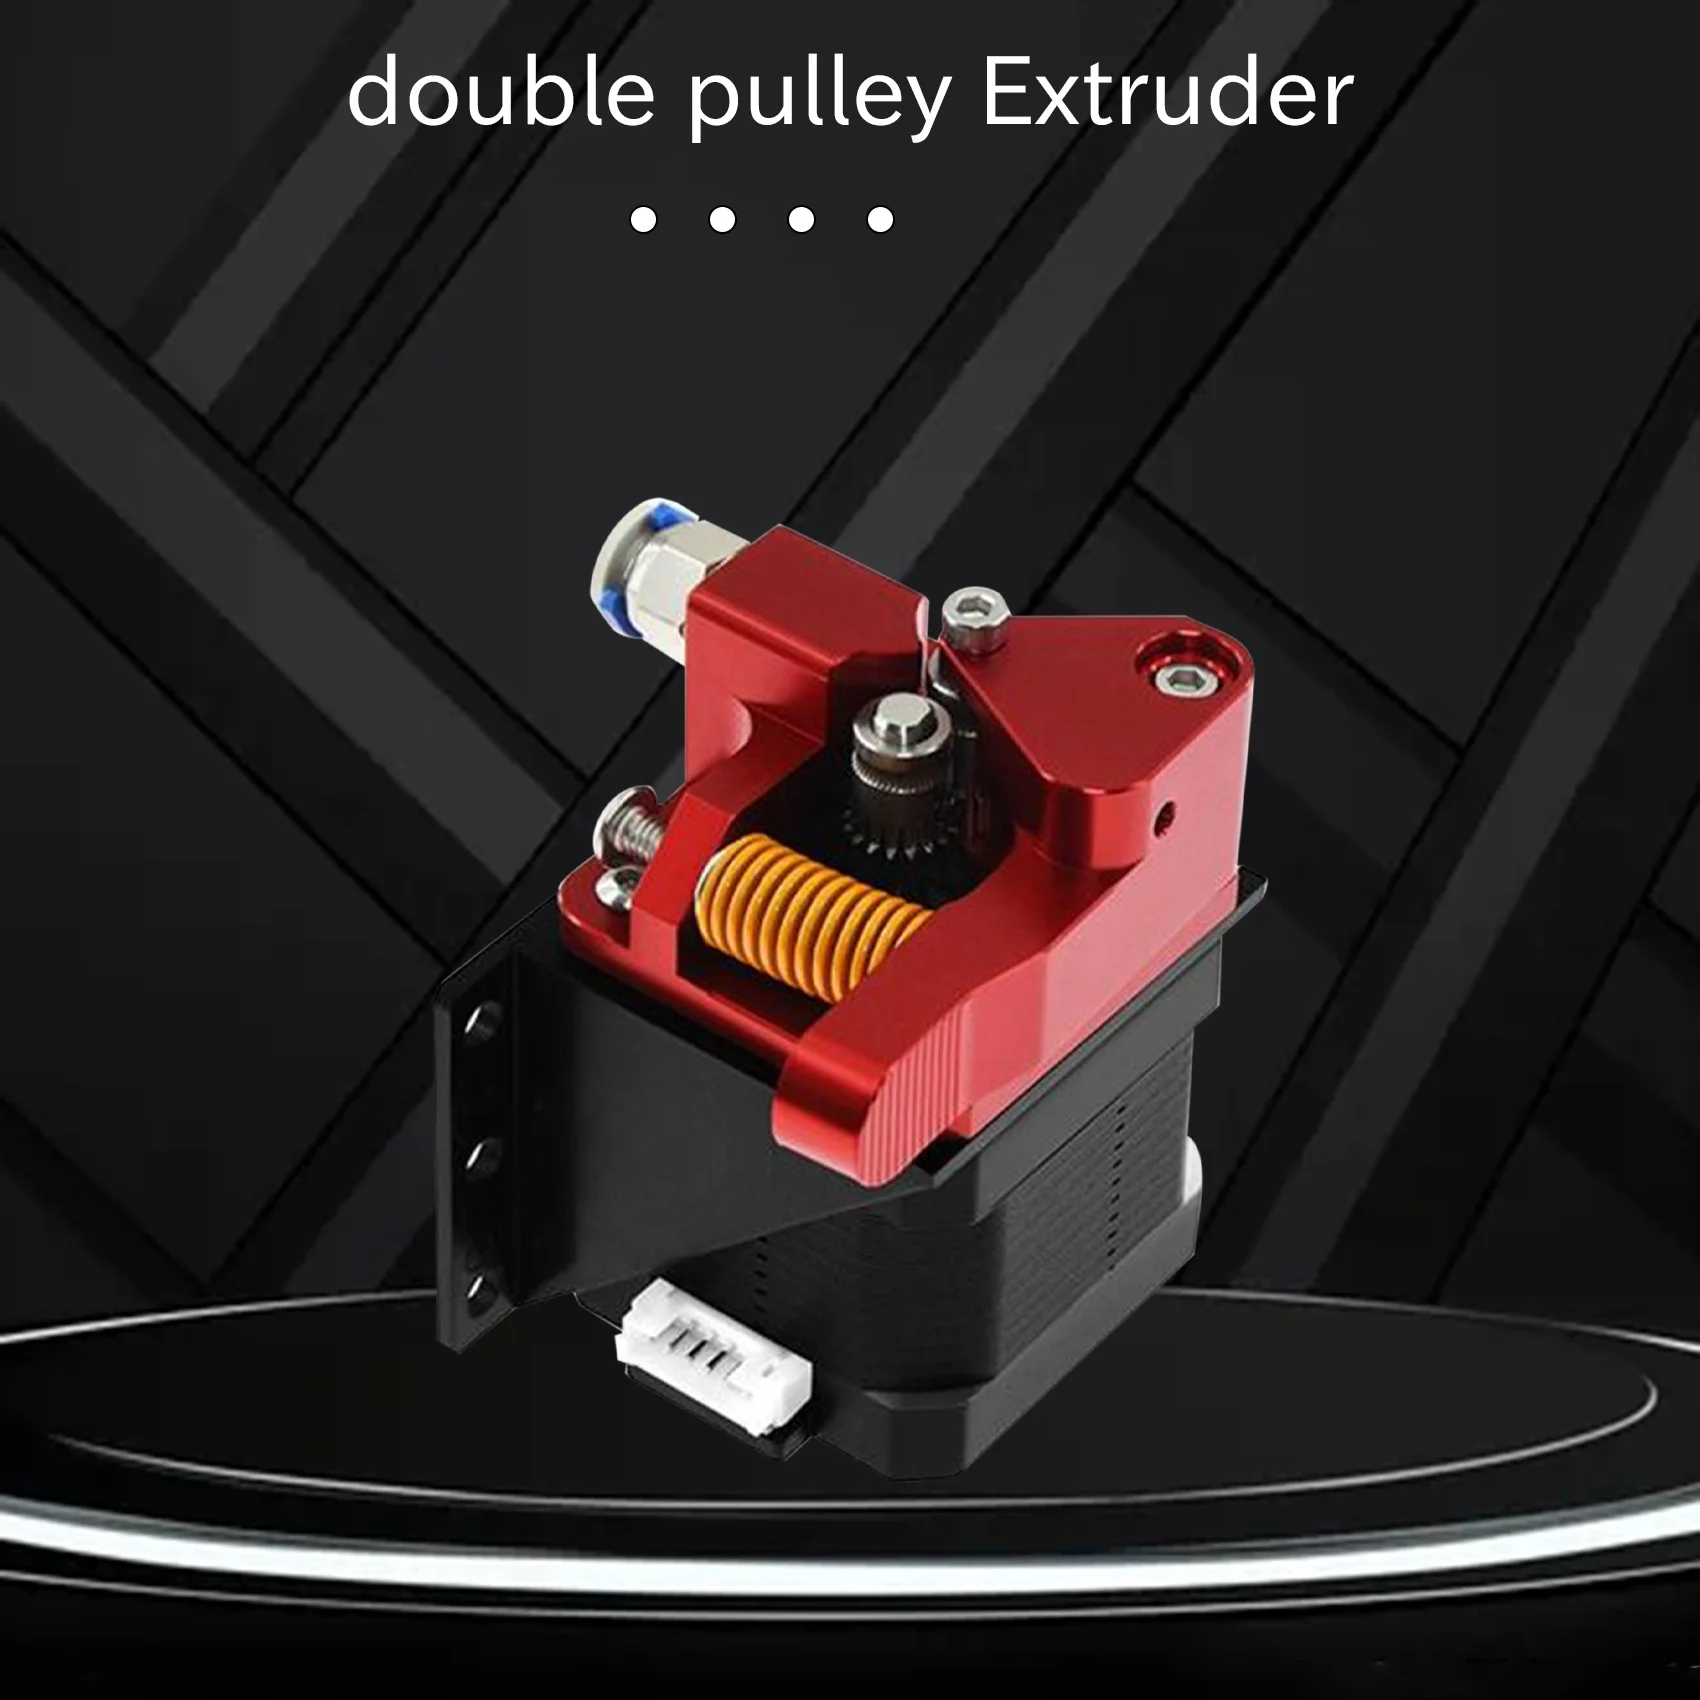 

Cr10 Pro Aluminum Upgrade Dual Gear Extruder Kit for Cr10S Pro Reprap Prusa I3 1.75Mm Drive Feed Double Pulley Extruder